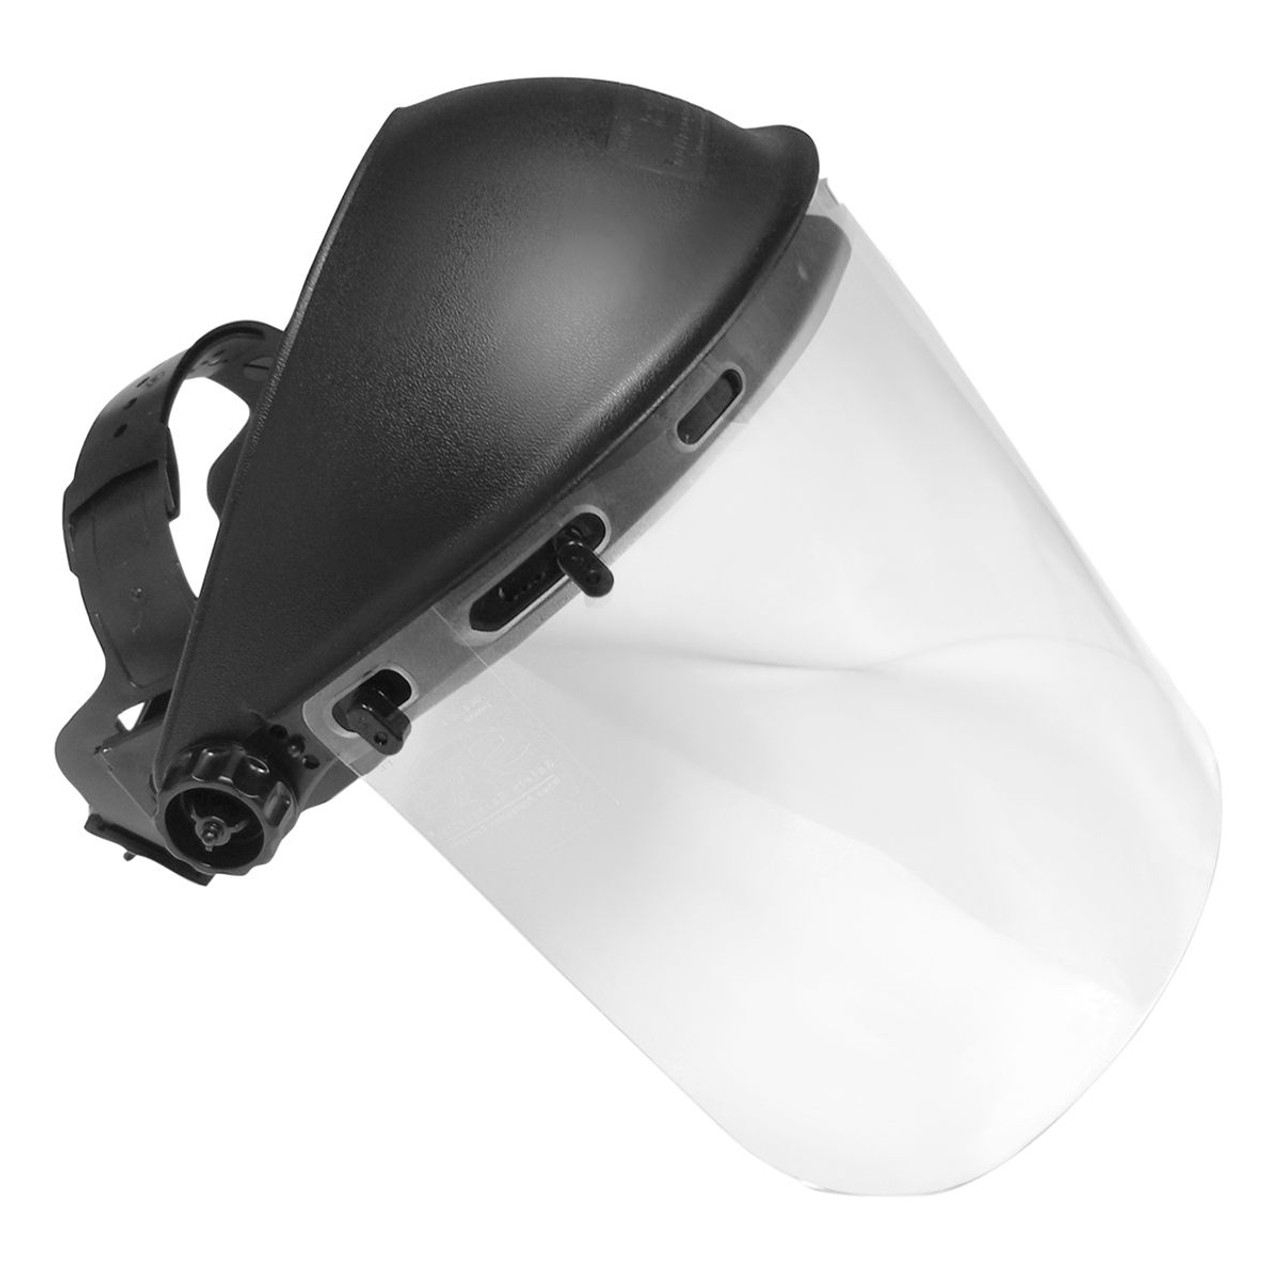 Impact-Resistant Standard Face Shield